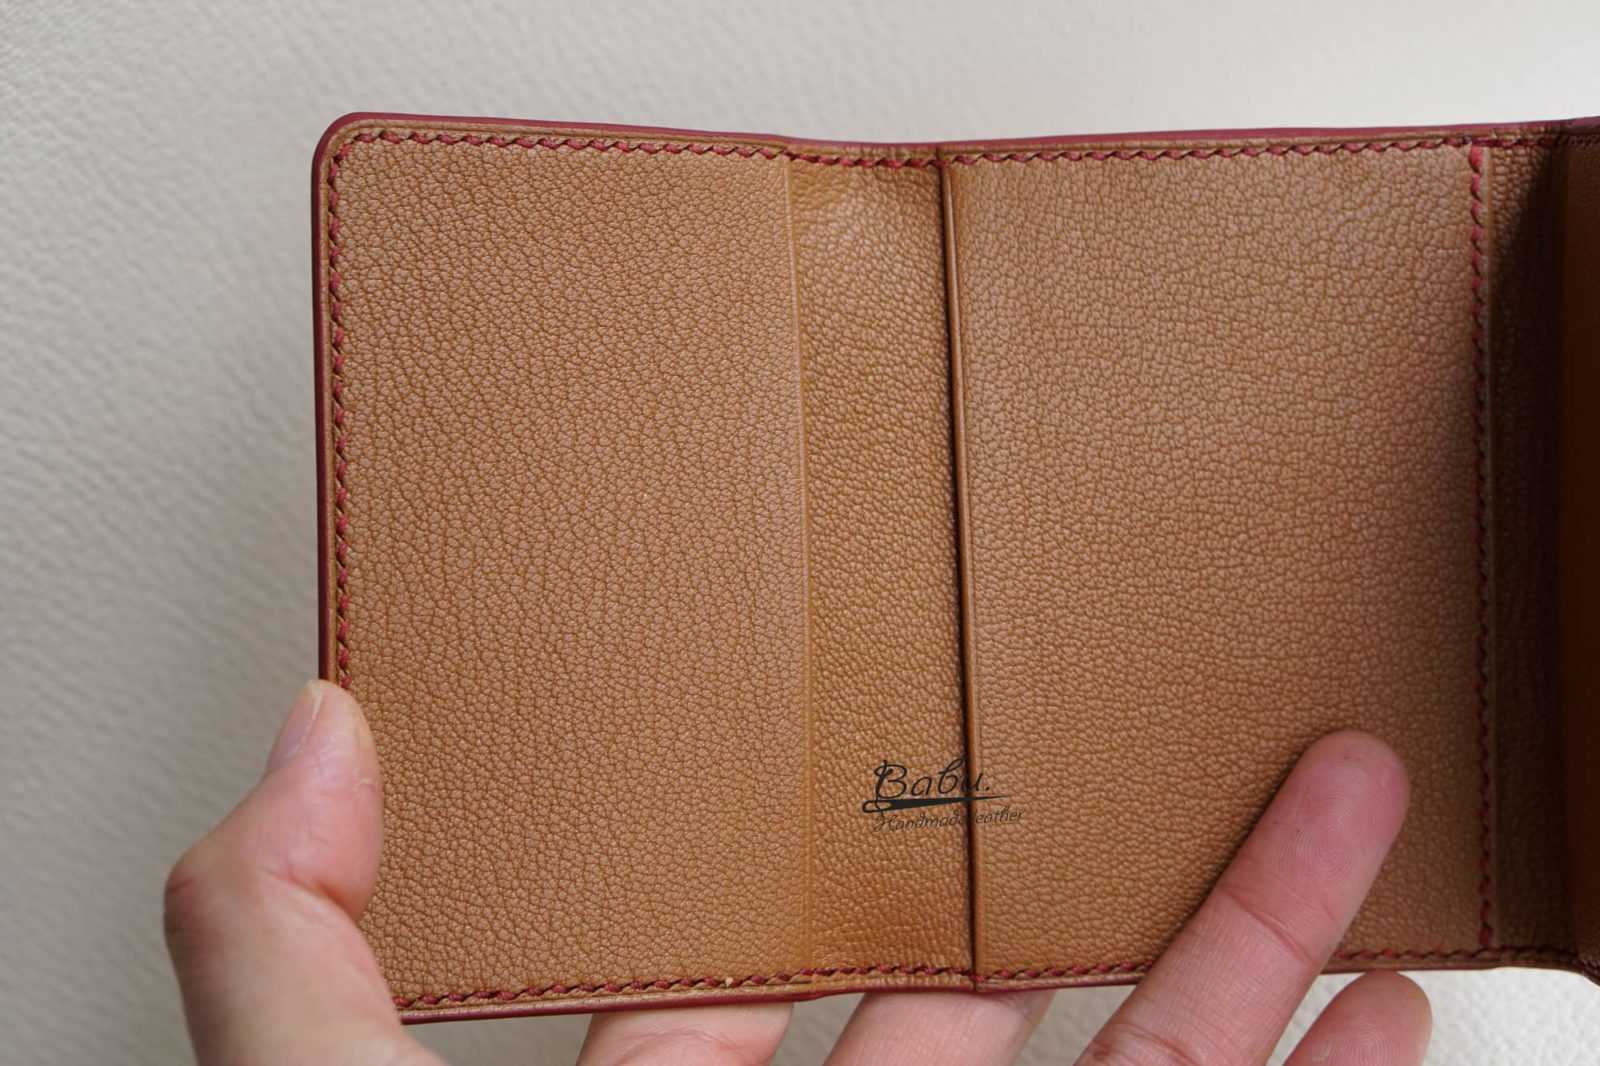 Alran Sully Goat Leather Credit card wallet, Handmade Leather Ticket holder  WL298